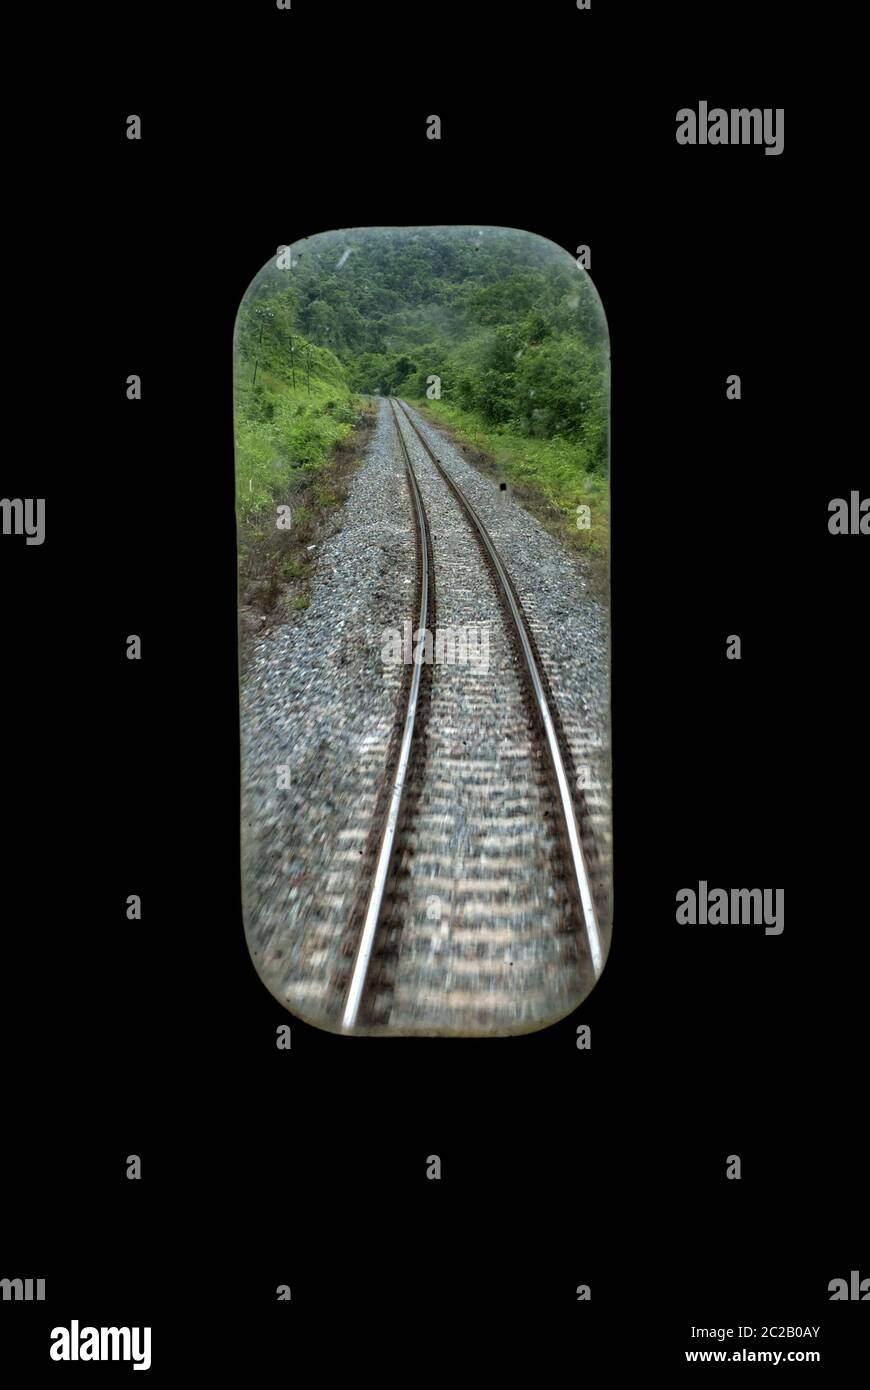 Train track through the tropical forest, seen from the inside train's window. Stock Photo